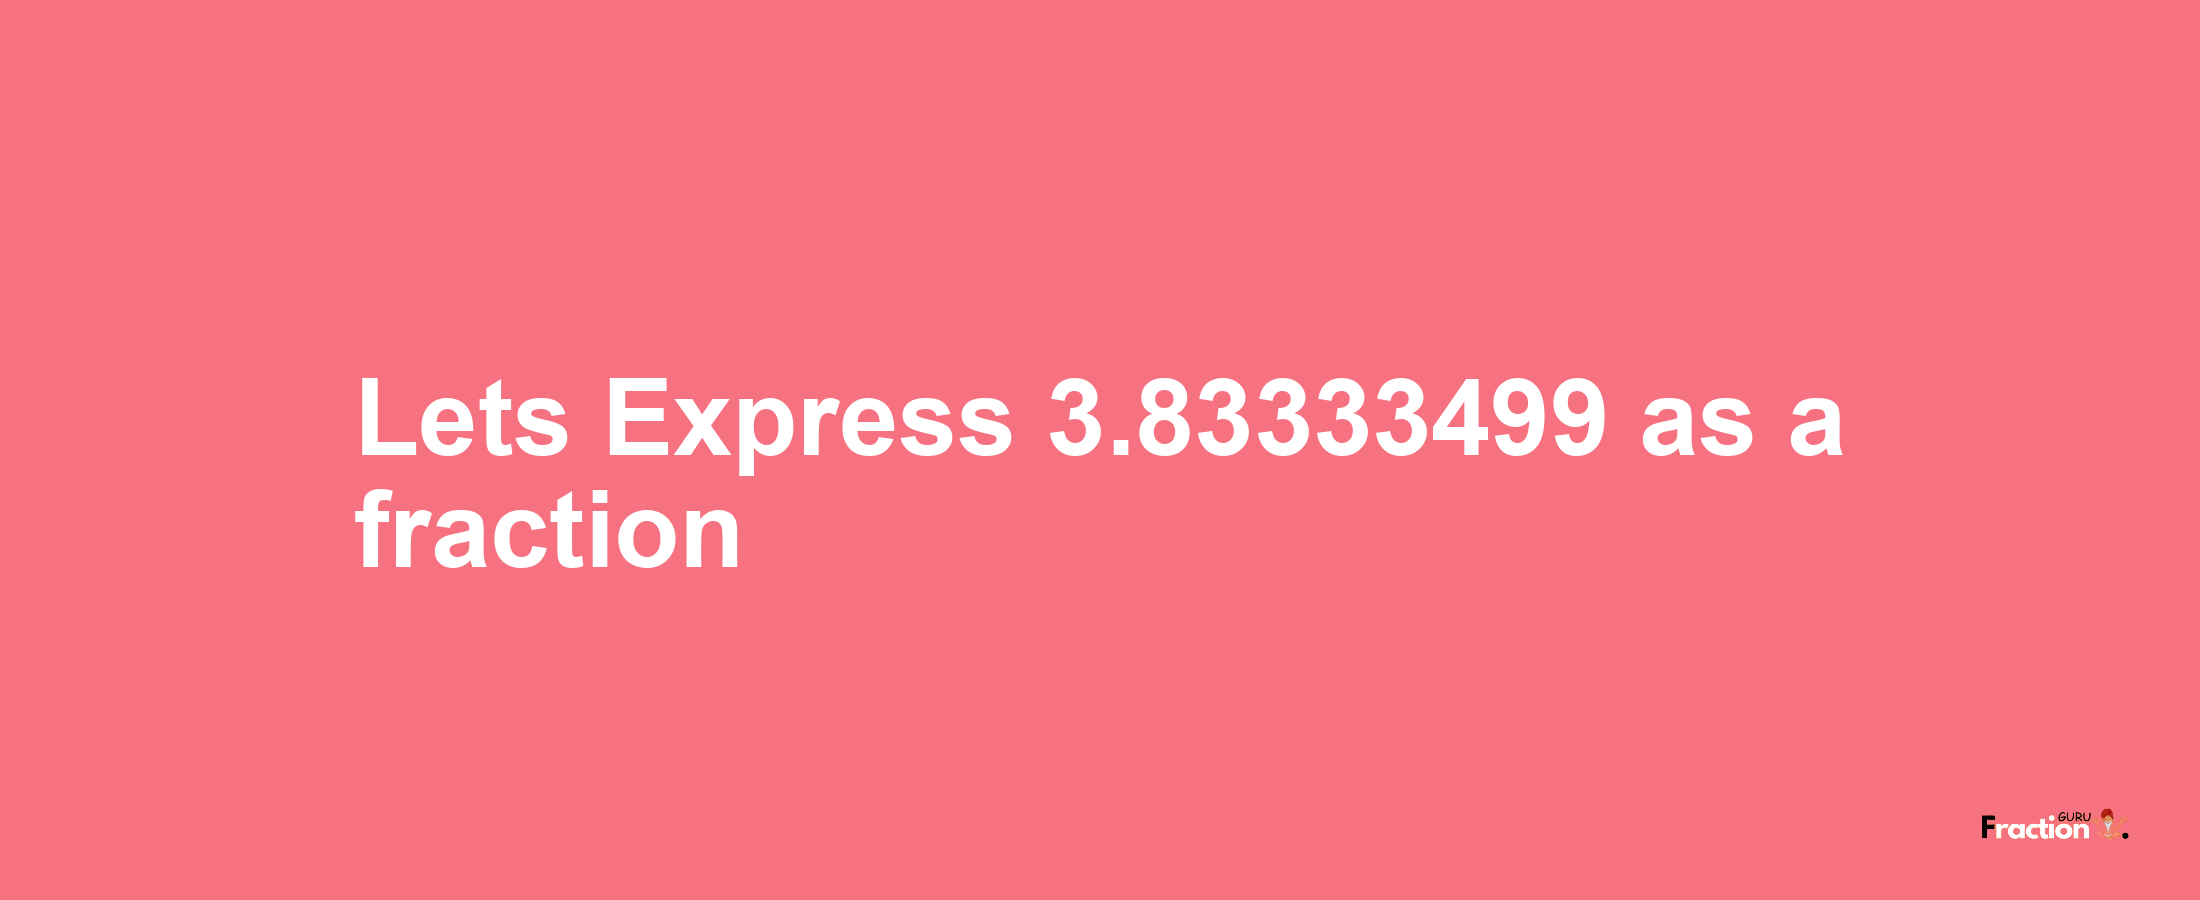 Lets Express 3.83333499 as afraction